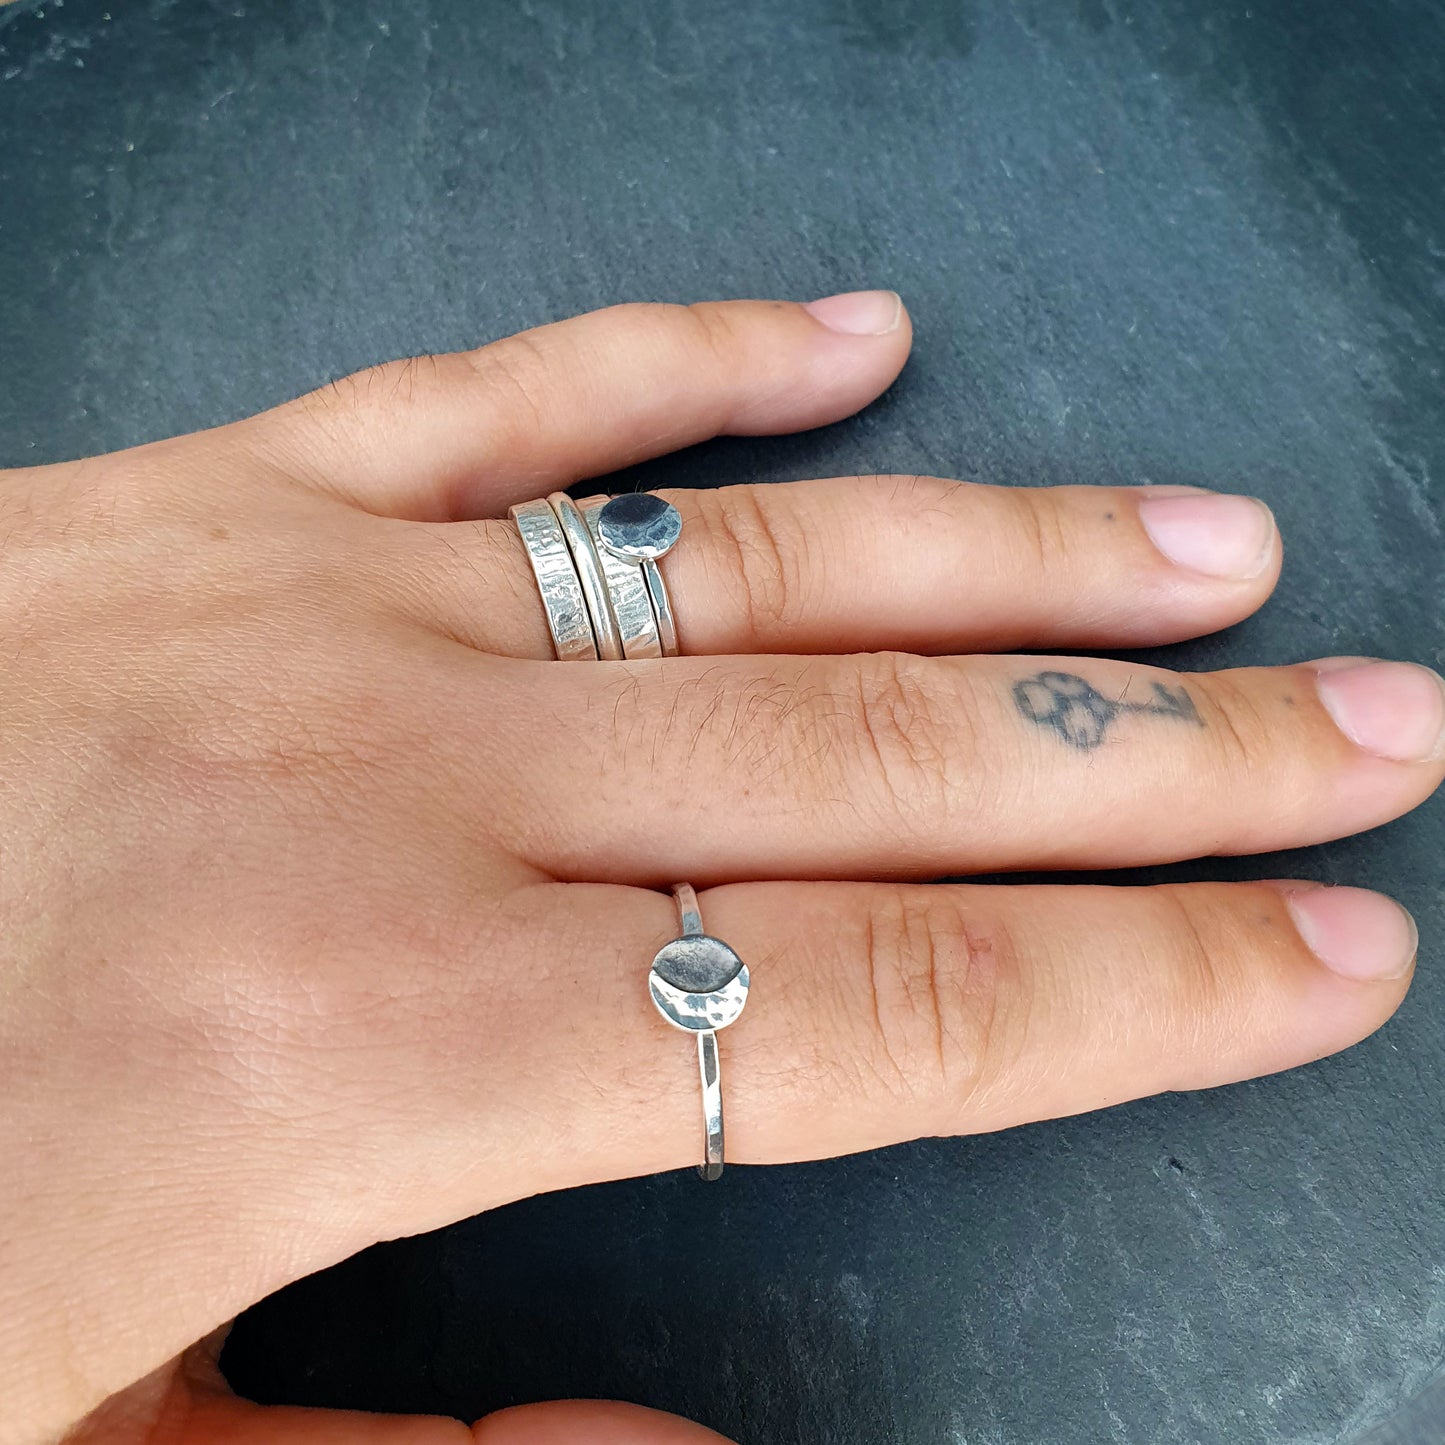 Riley wears one Luna ring stacked with his wedding bands and one alone on his forefinger. His nails are short and there's a small tattoo of a key on the last knuckle of his middle finger.